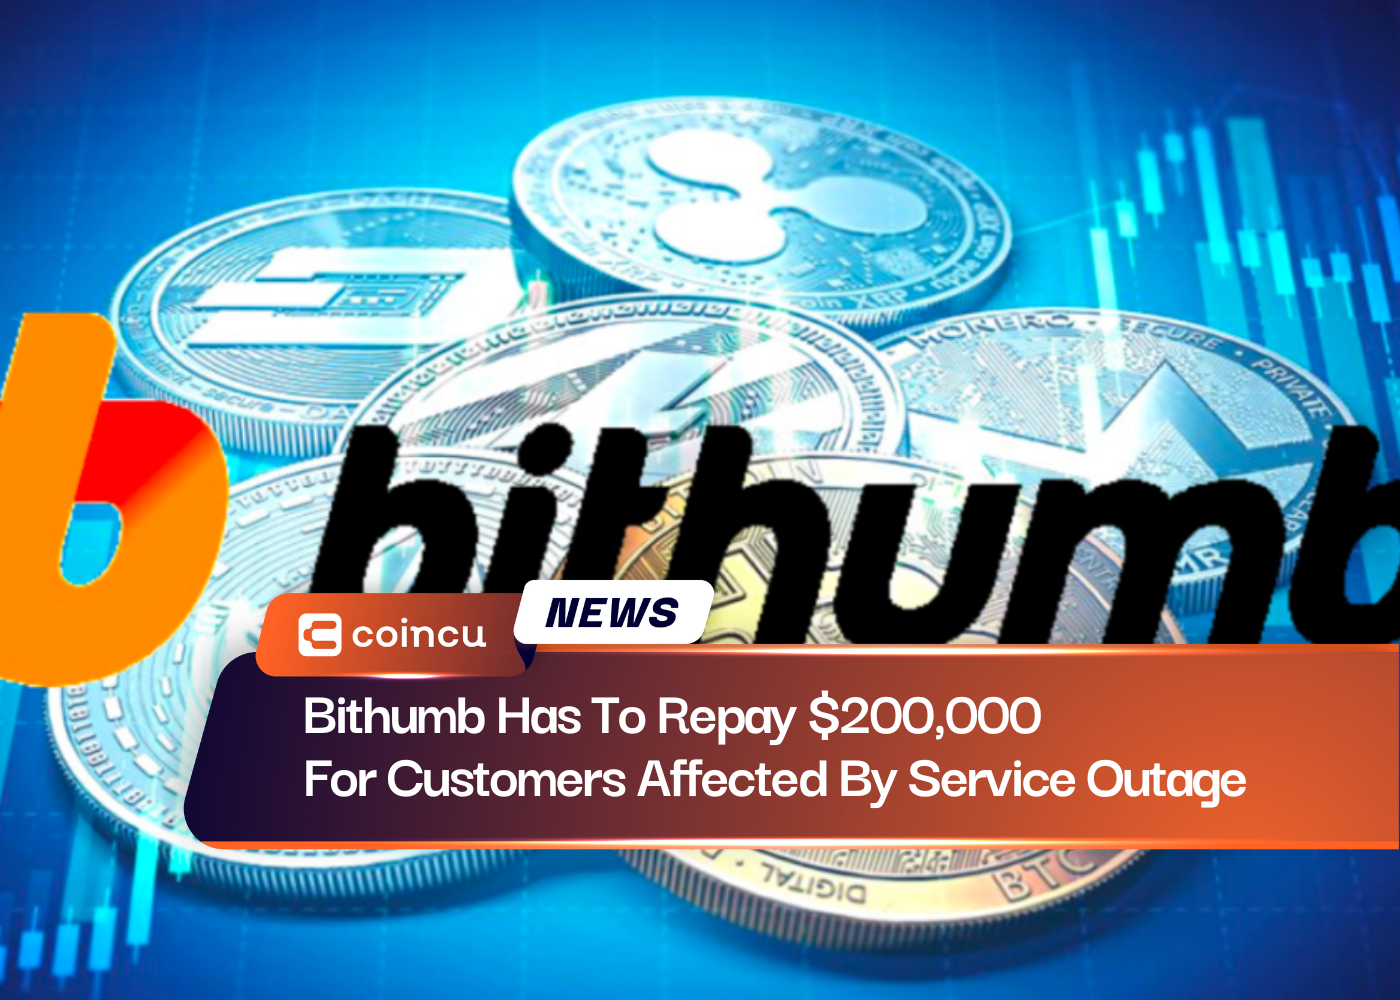 Bithumb Has To Repay $200,000 For Customers Affected By Service Outage